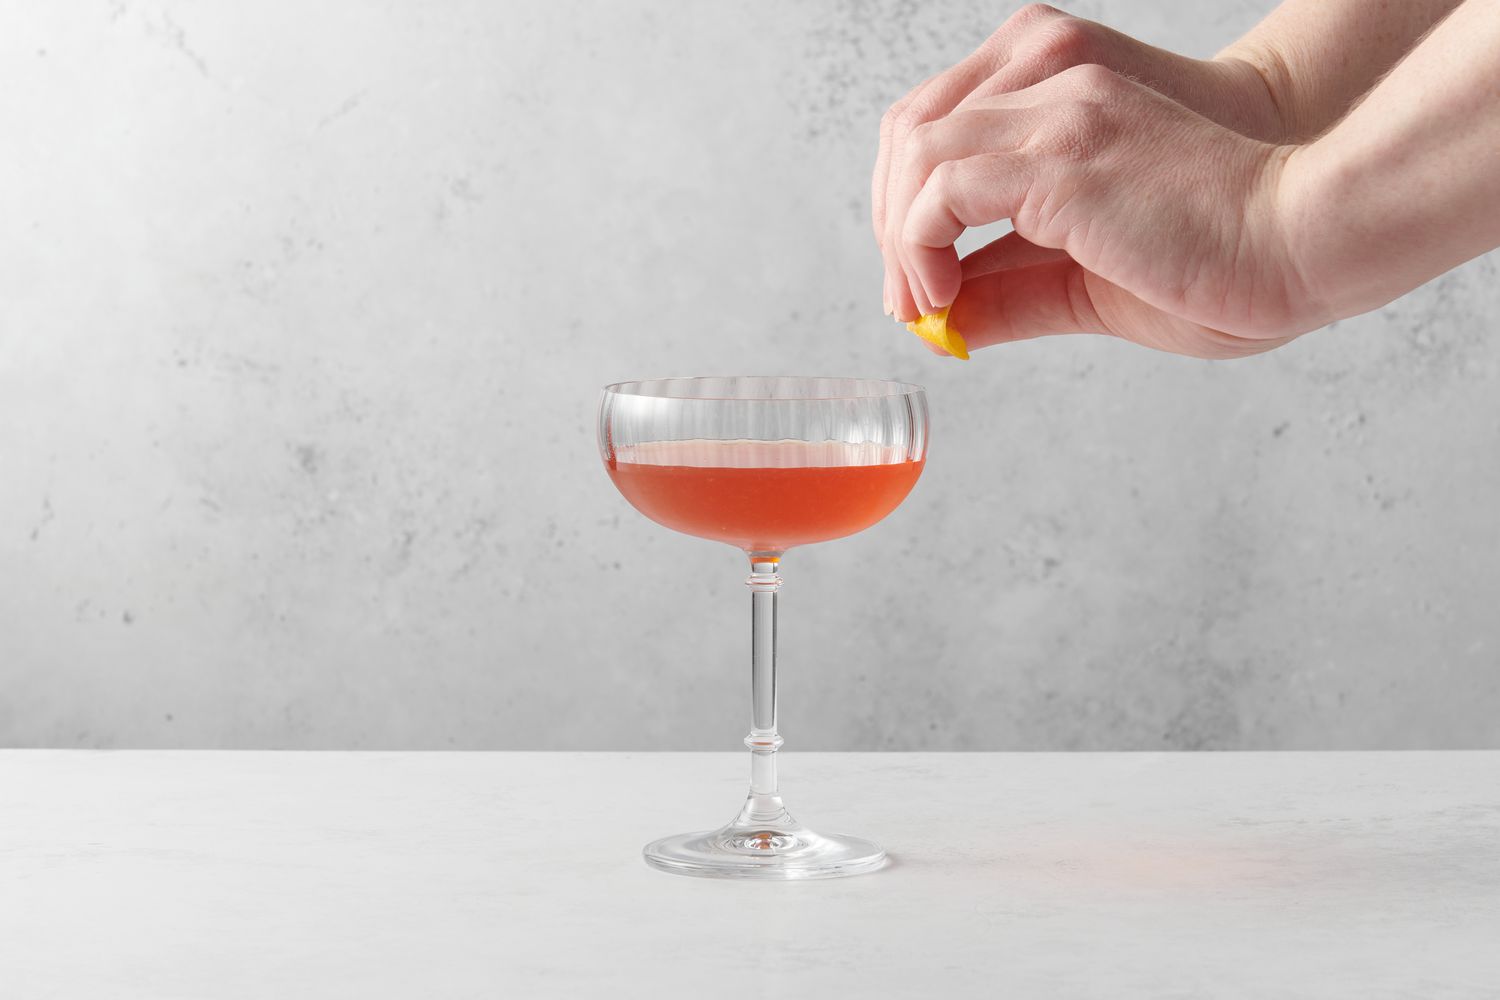 A hand expressing a lemon peel into a cocktail